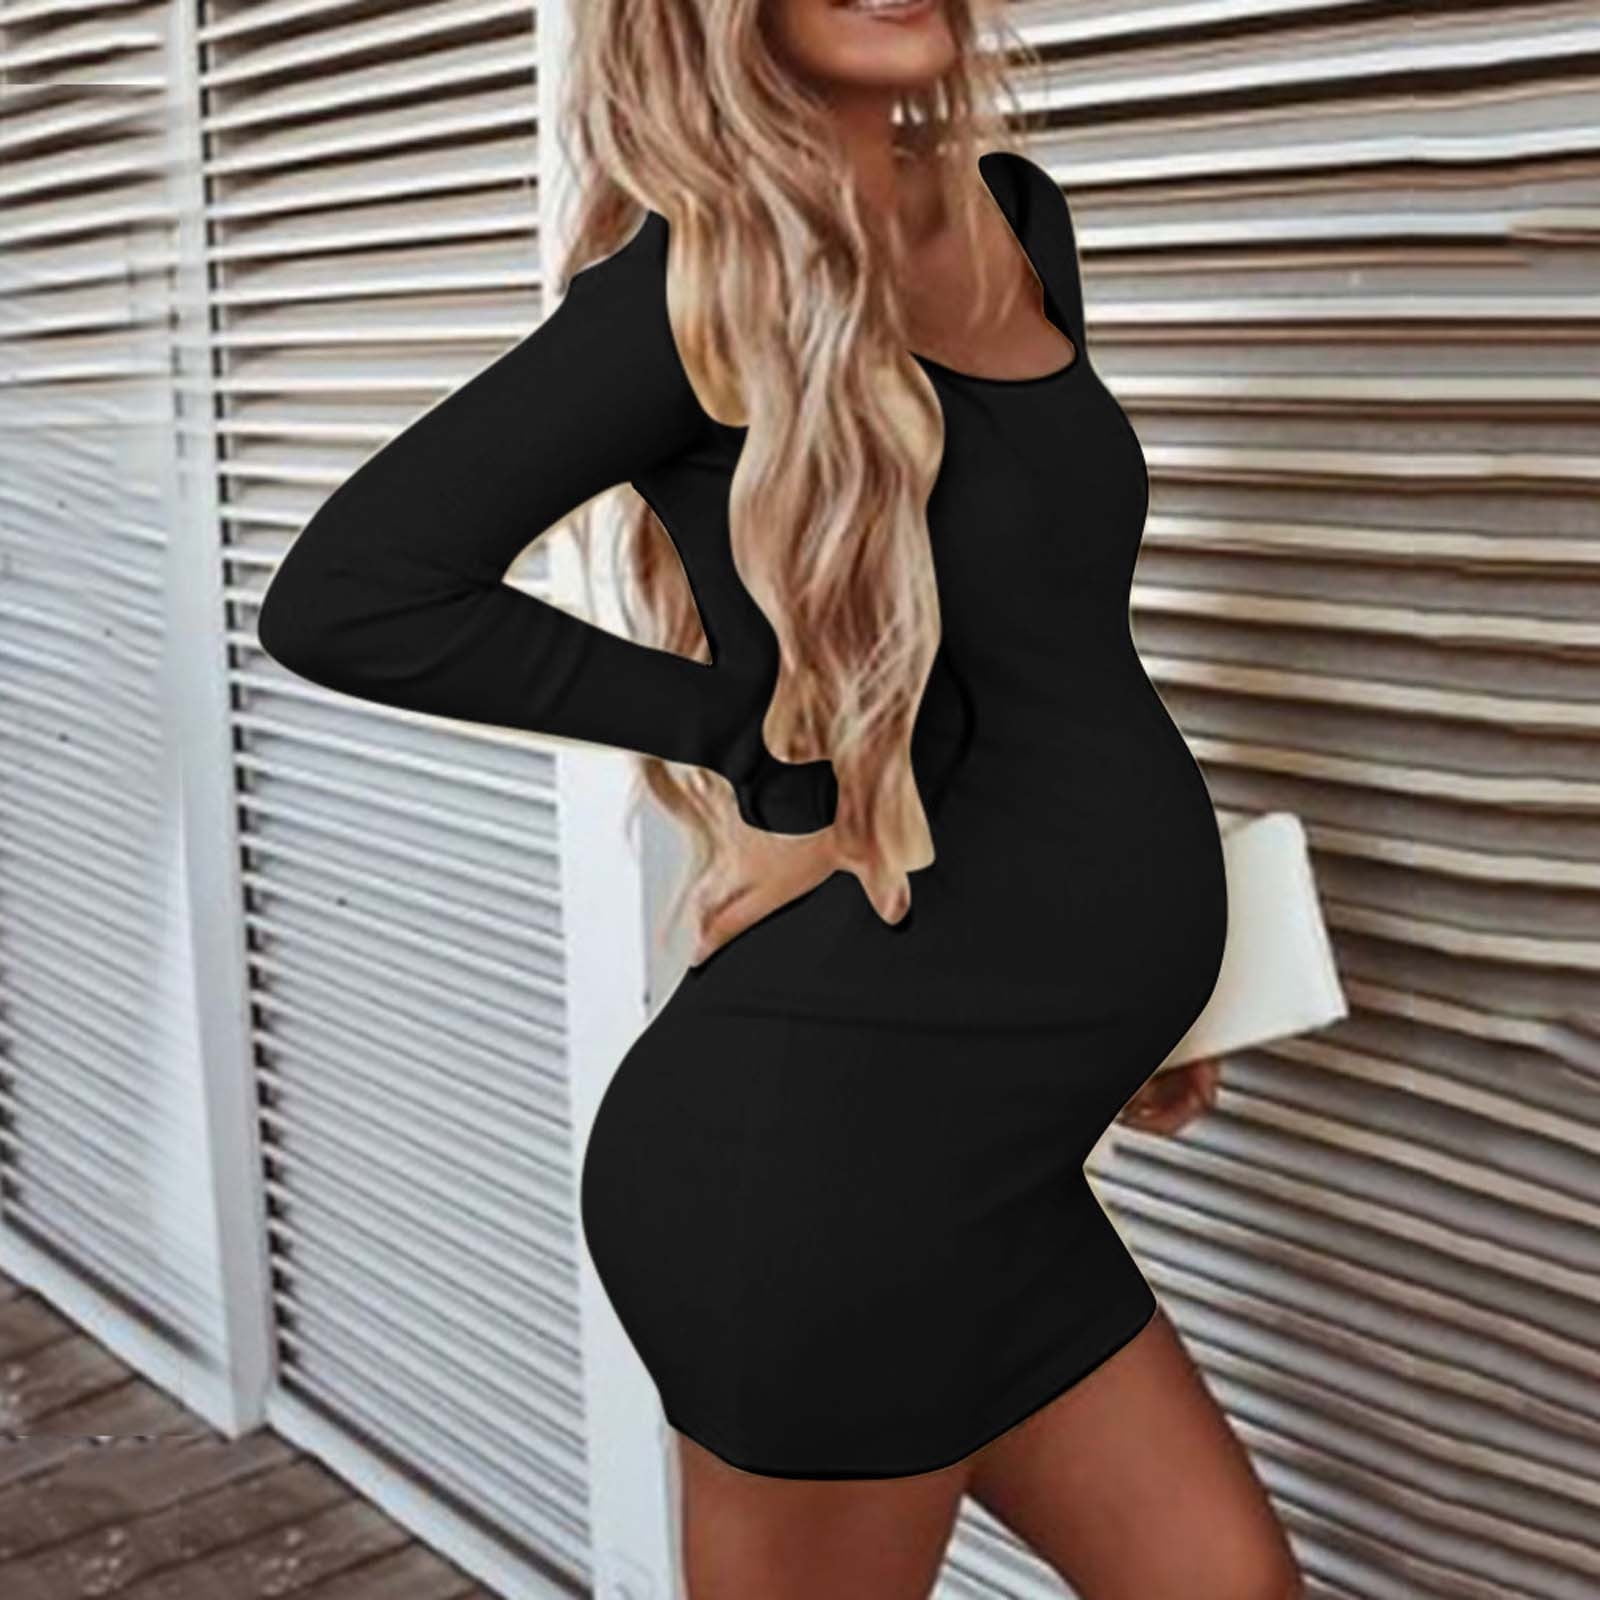  Maternity Jessica Simpson - Women's Clothing / Women's Fashion:  Clothing, Shoes & Jewelry